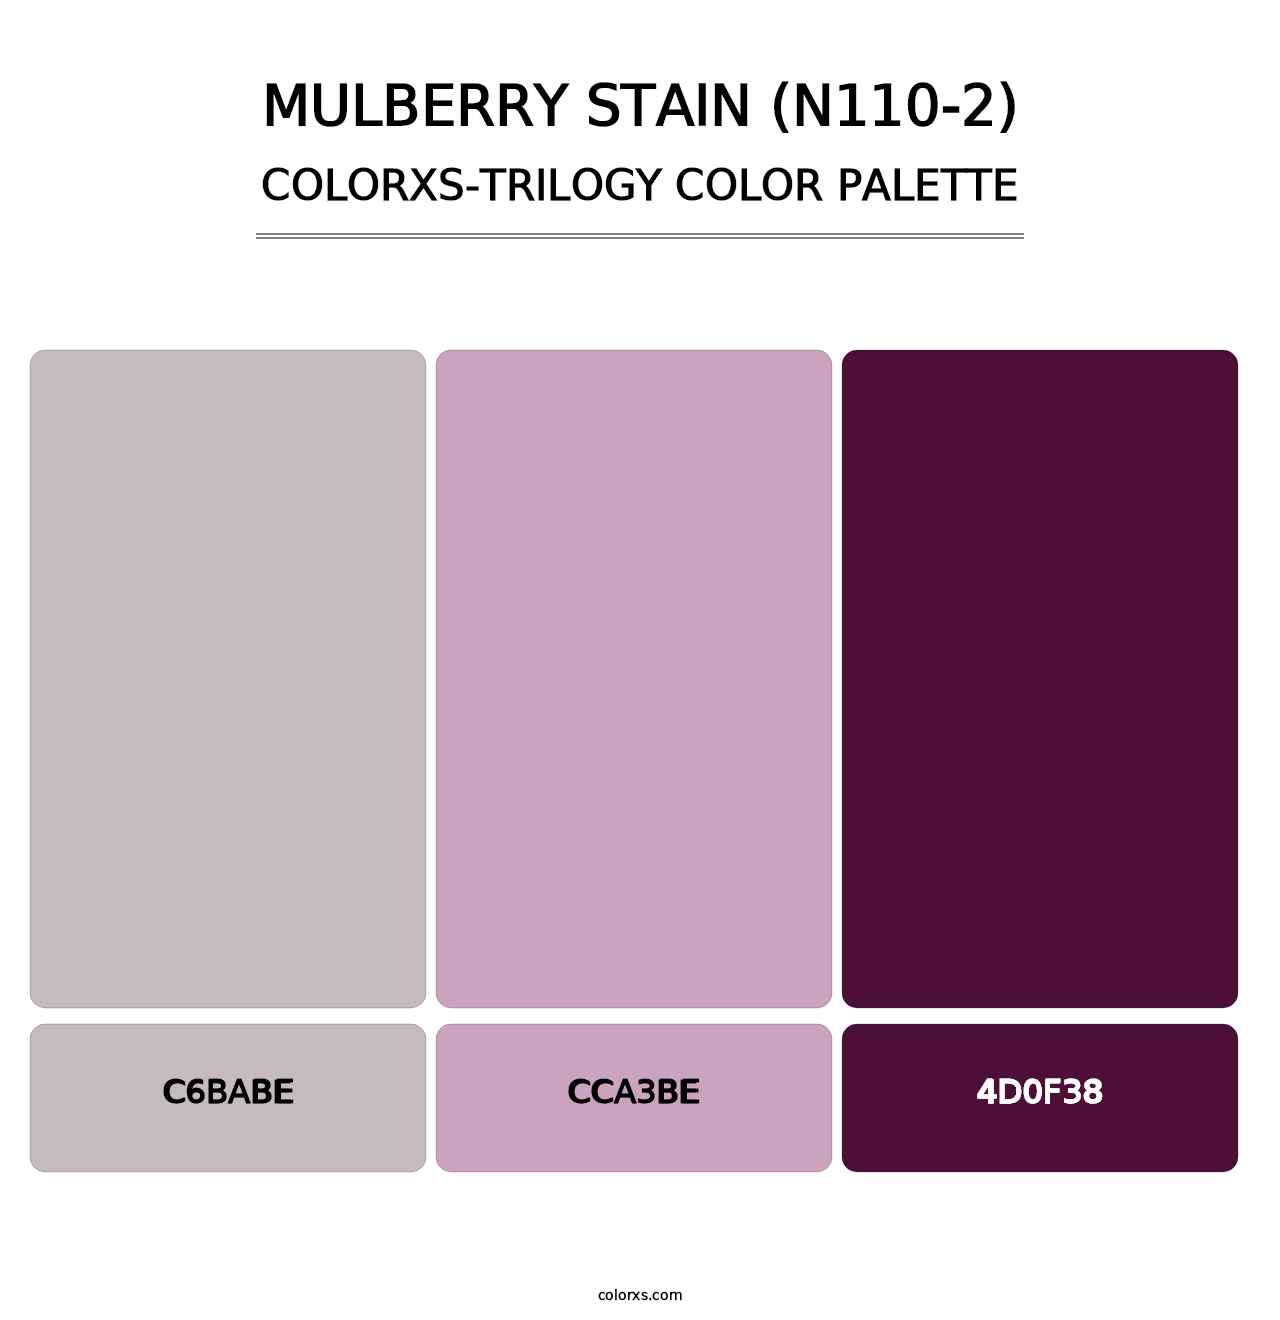 Mulberry Stain (N110-2) - Colorxs Trilogy Palette